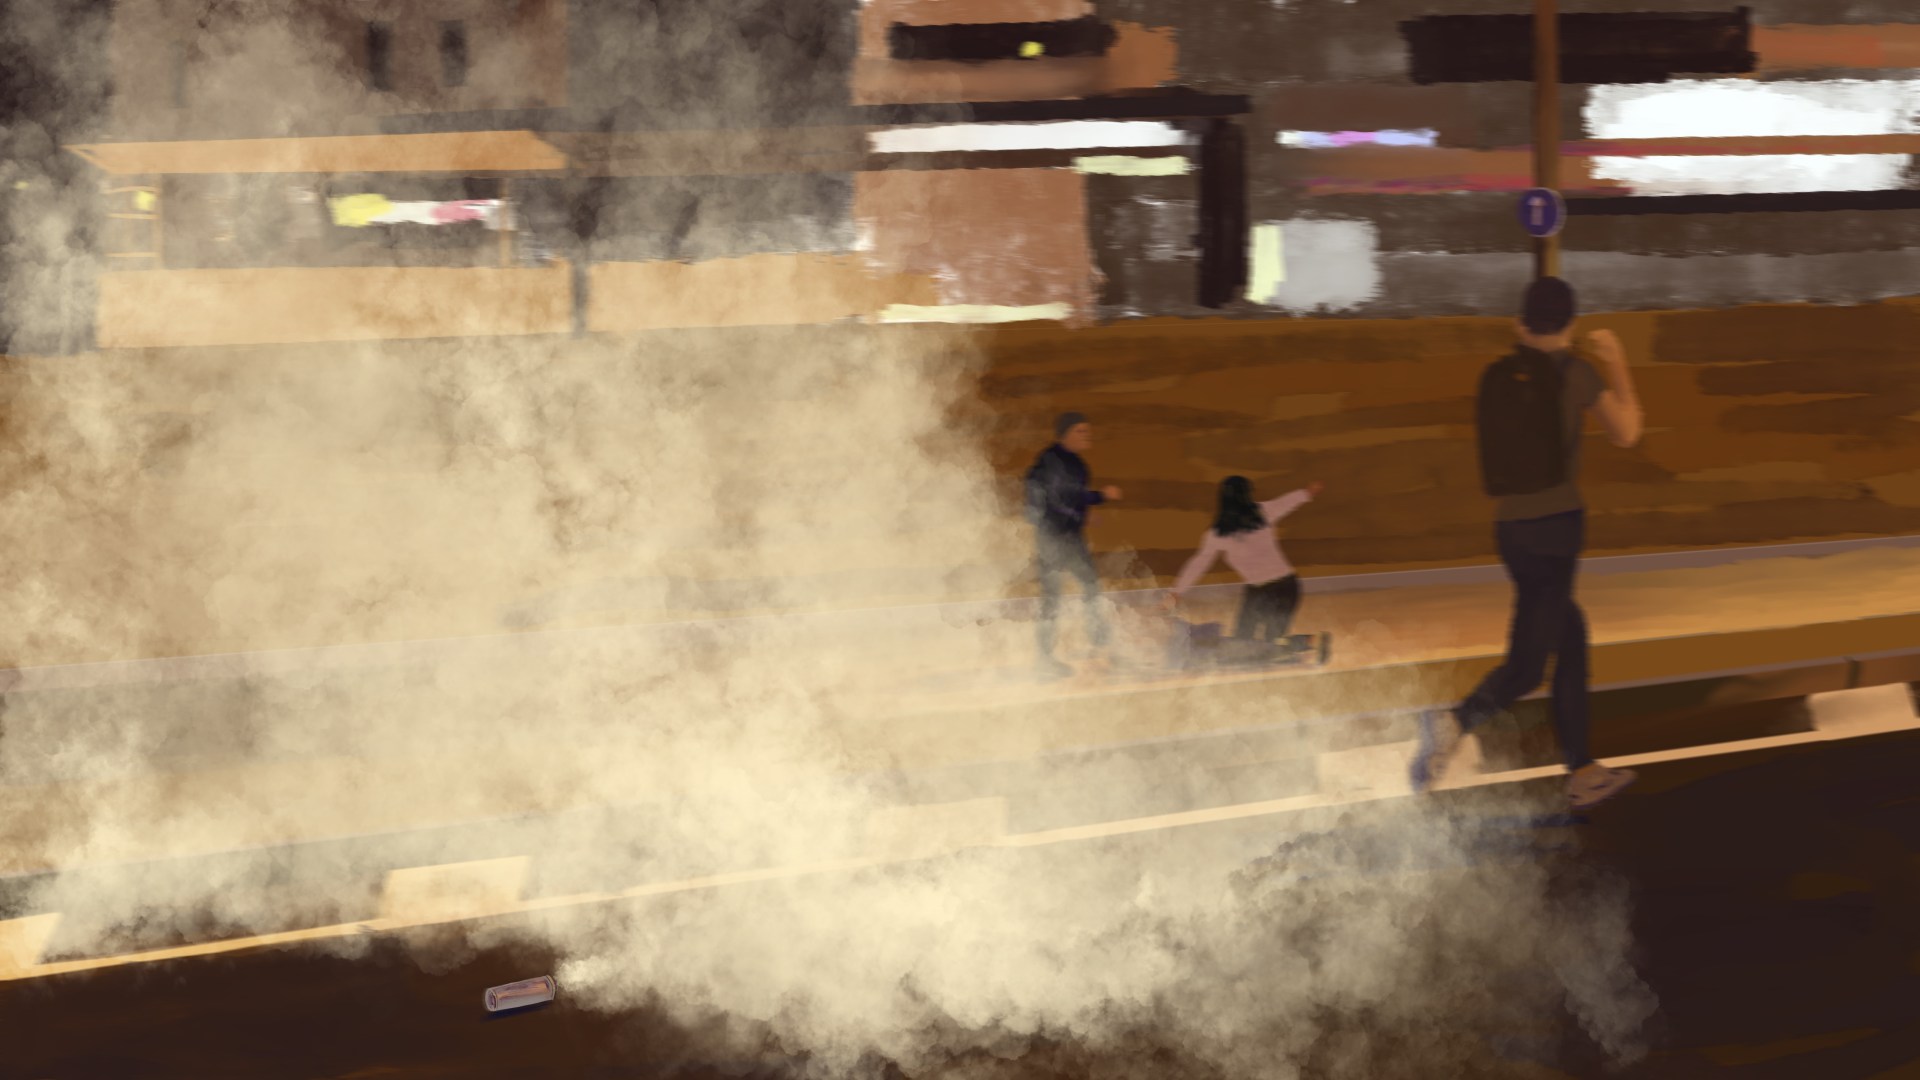 An illustration of three people on the street at night with a large amount of teargas smoke coming from the left end of the illustration.